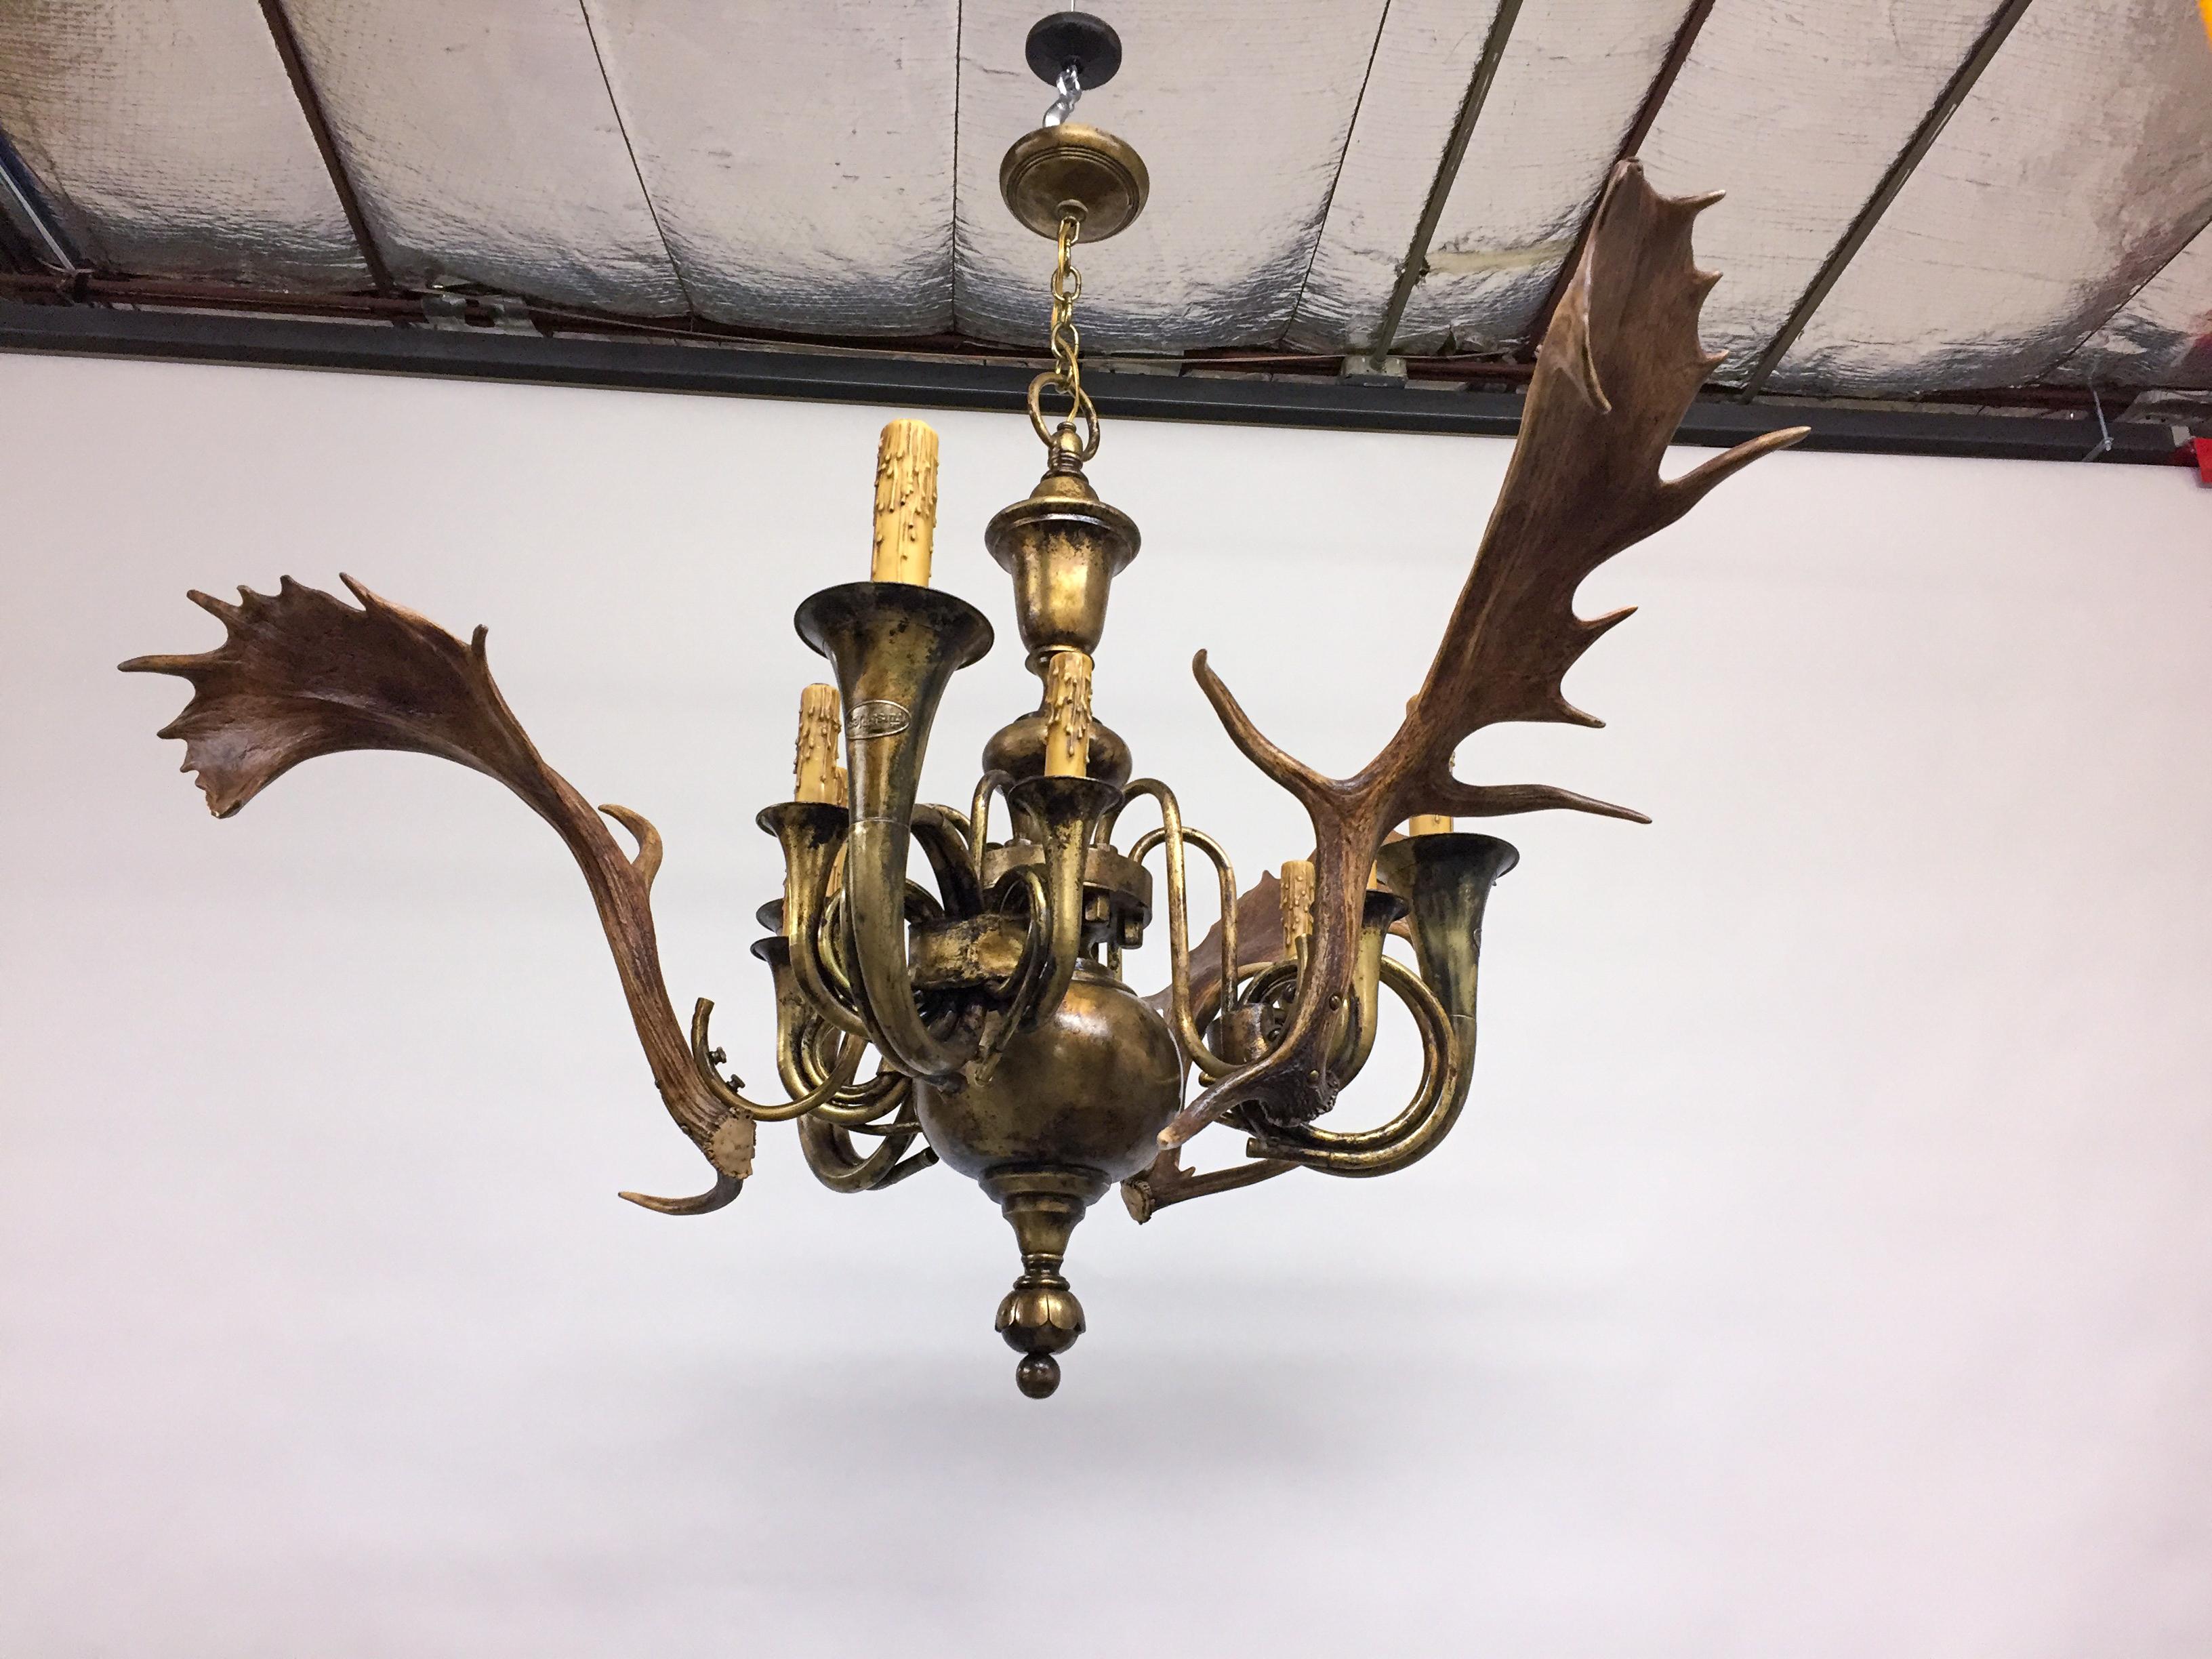 This extraordinary chandelier has been handcrafted with antique hunt horns and Habsburg fallow deer antlers. With nine lights total; three lights come out of the large Fürst Pless original hunt horns (used for red stag) with larger standard base